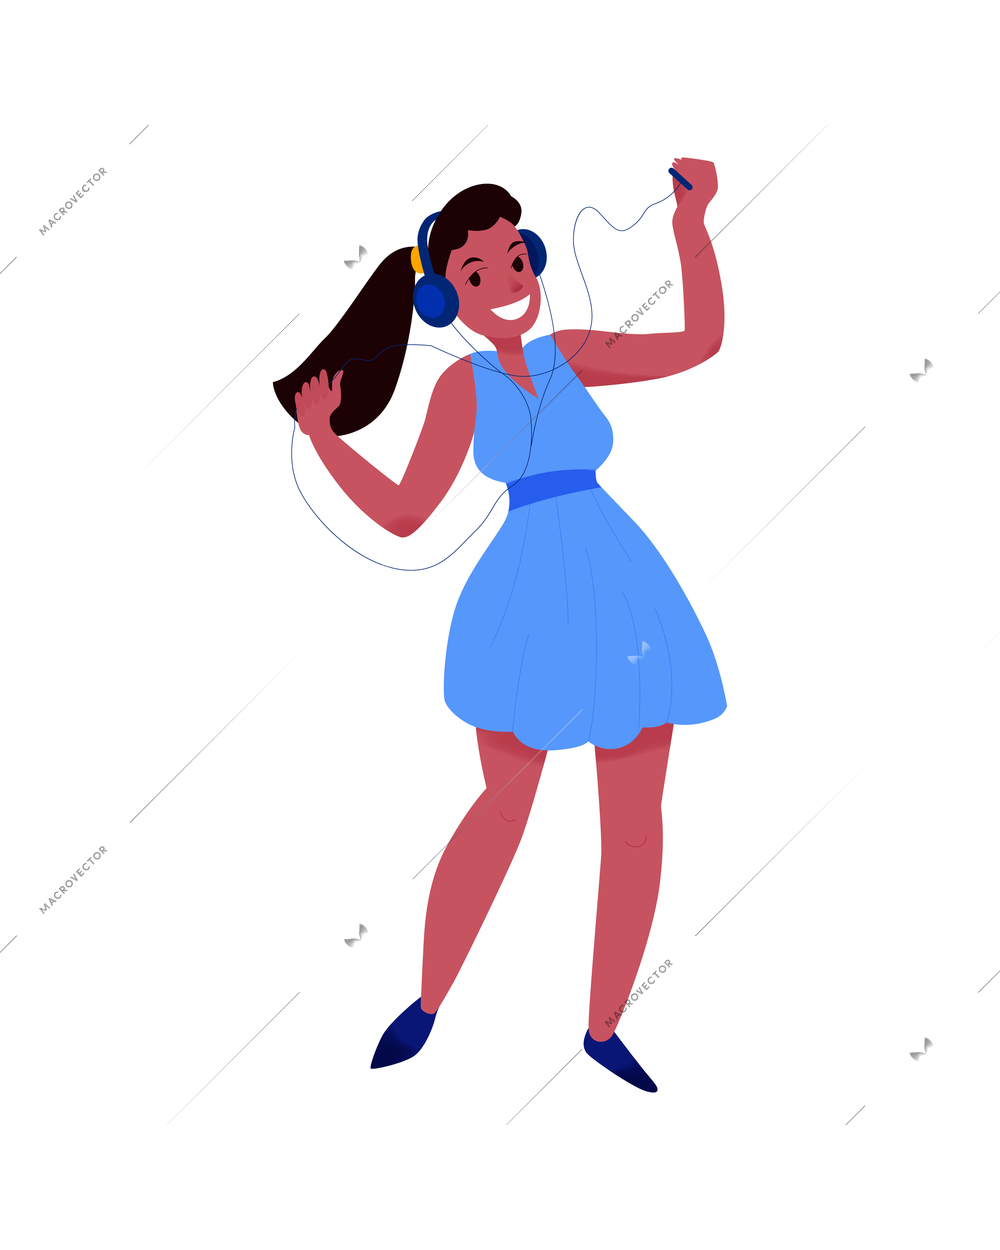 People headphones listen music composition with isolated human character of dancing girl in headphone vector illustration